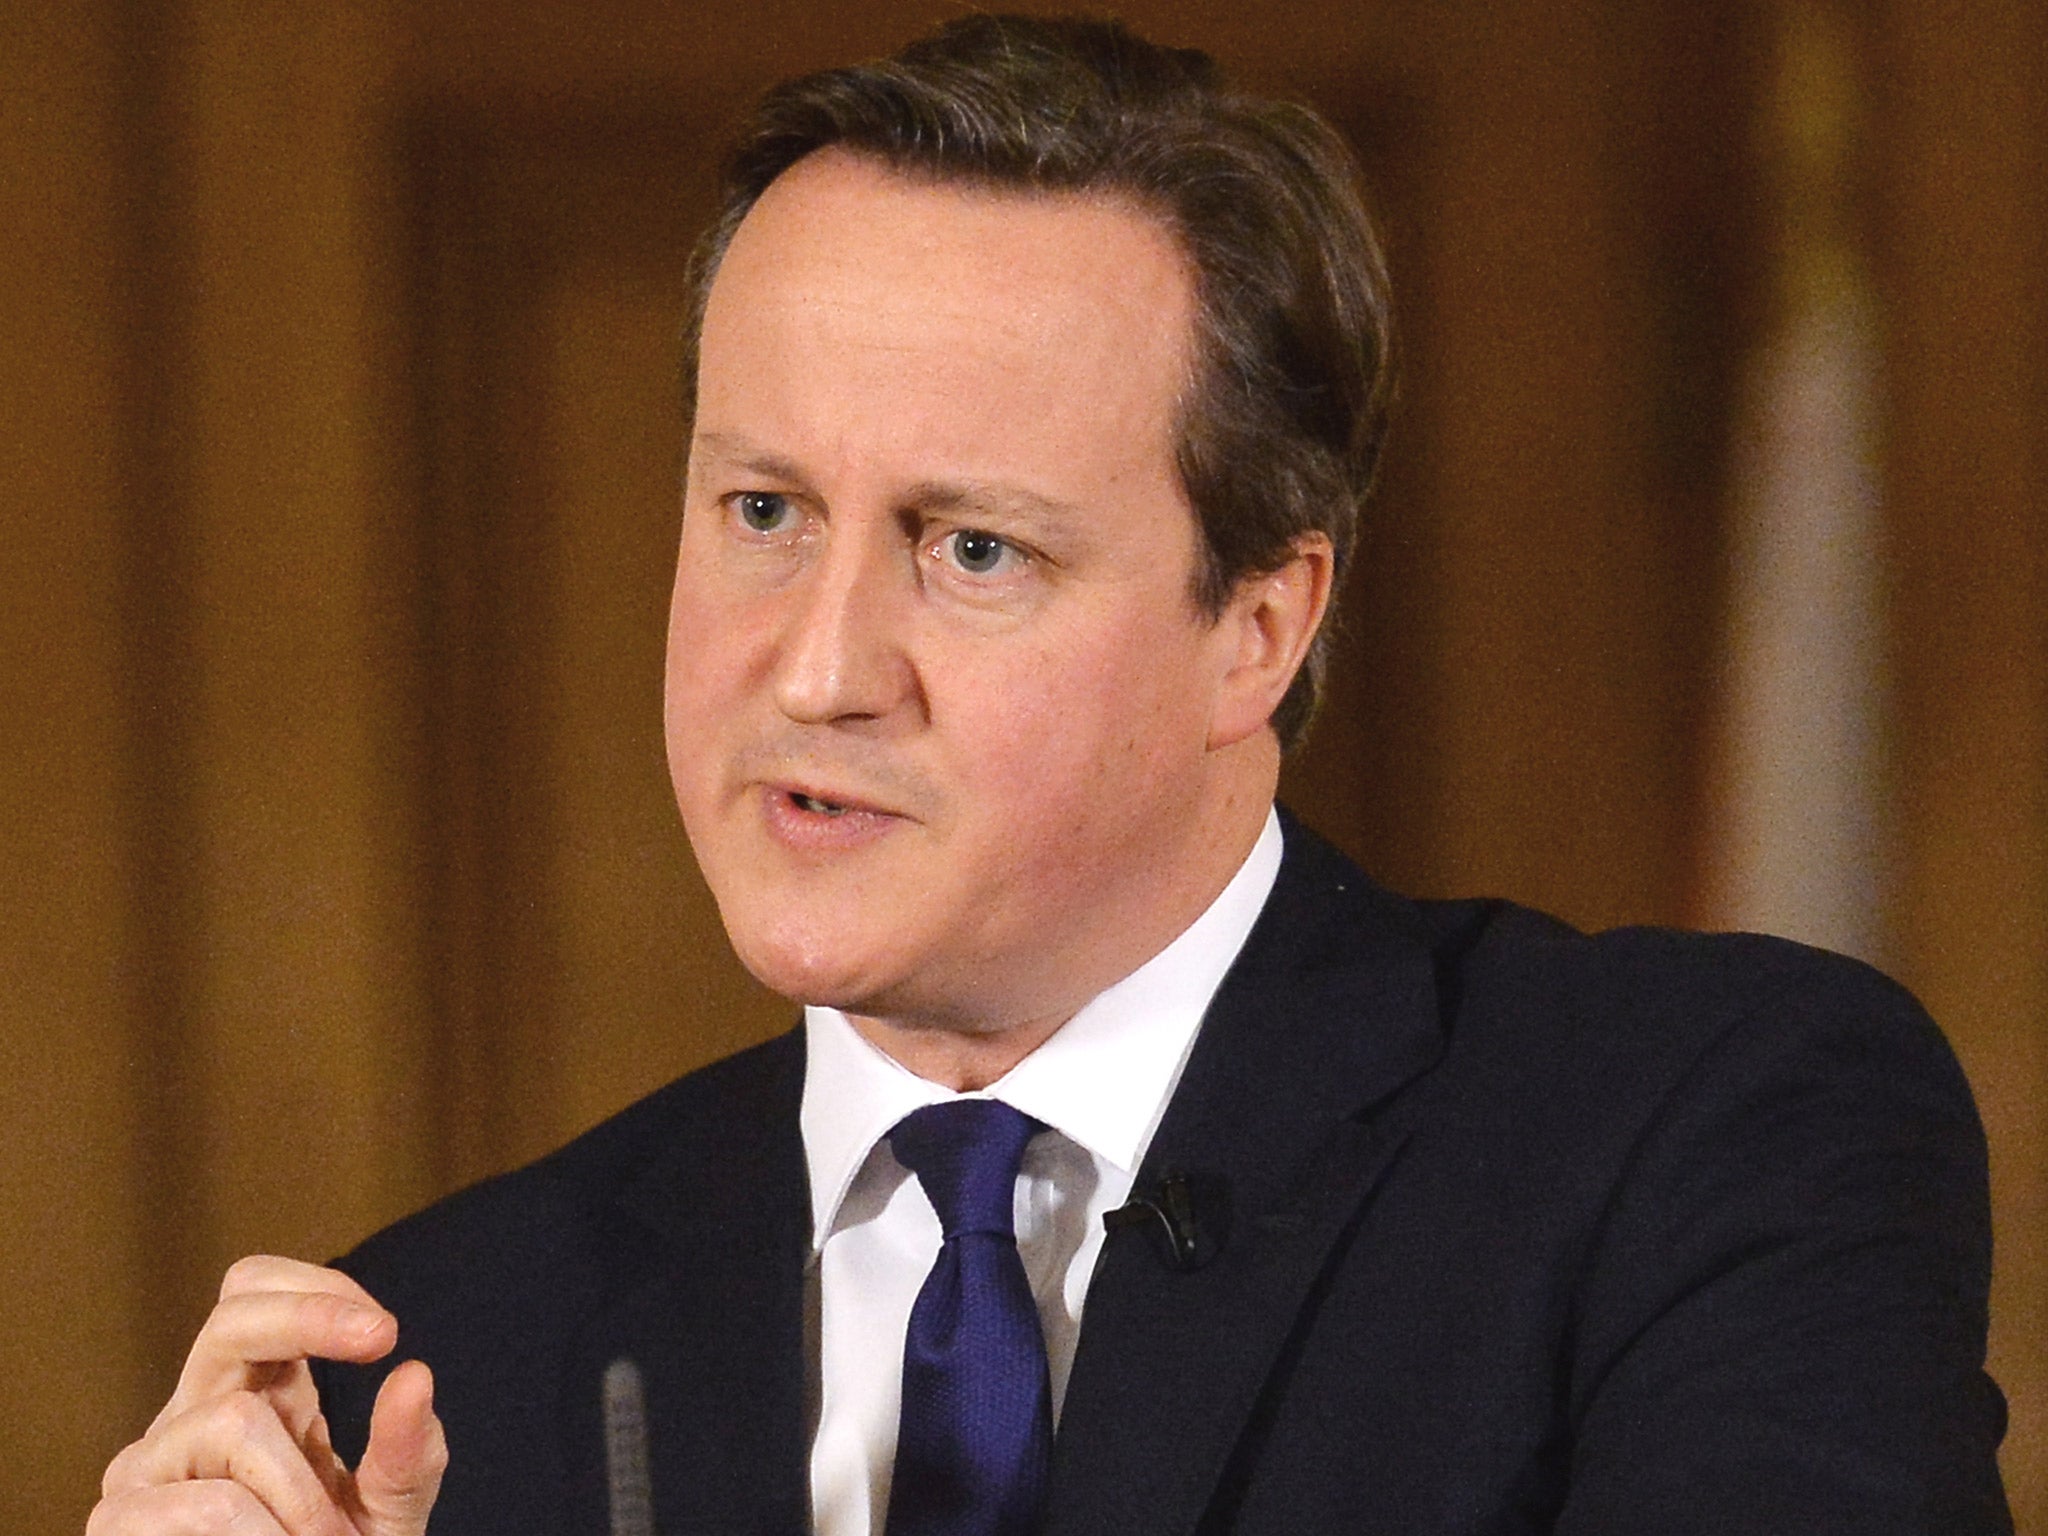 The Prime Minister is unlikely to rule out the possibility of a second coalition